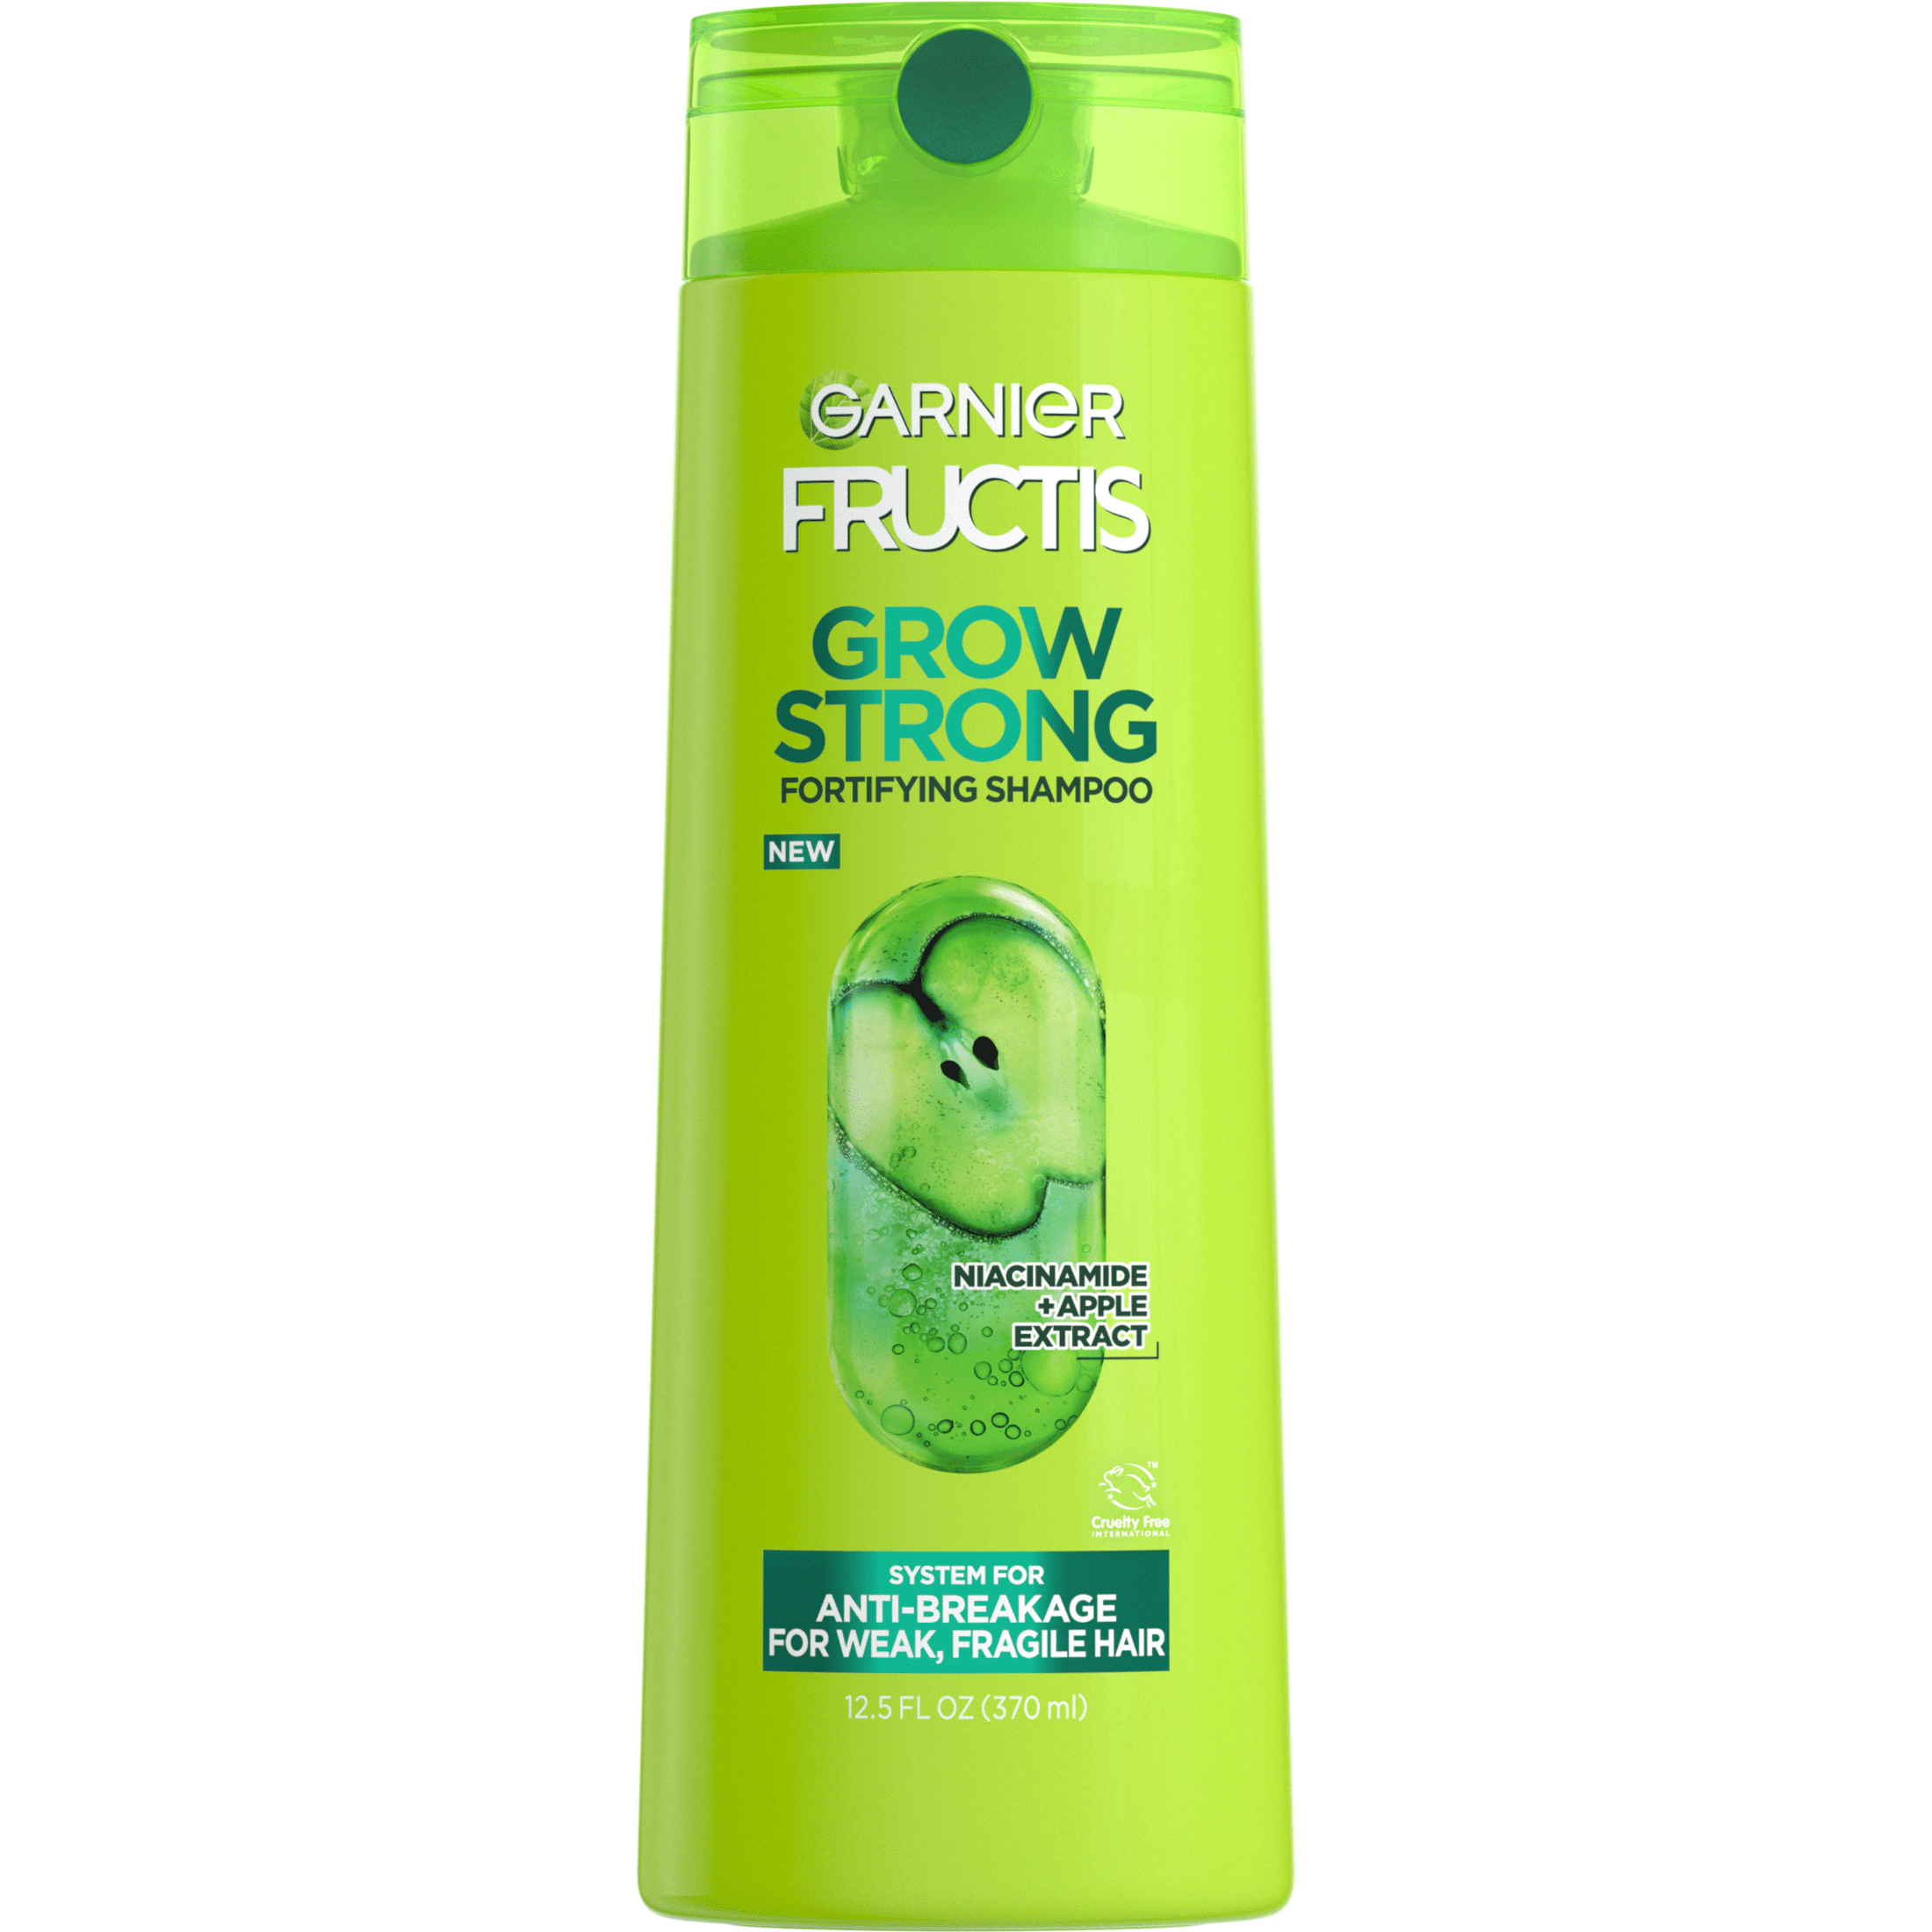 Fructis Grow Strong Fortifying Ceramide and Apple Extract, 12.5 fl oz - Walmart.com